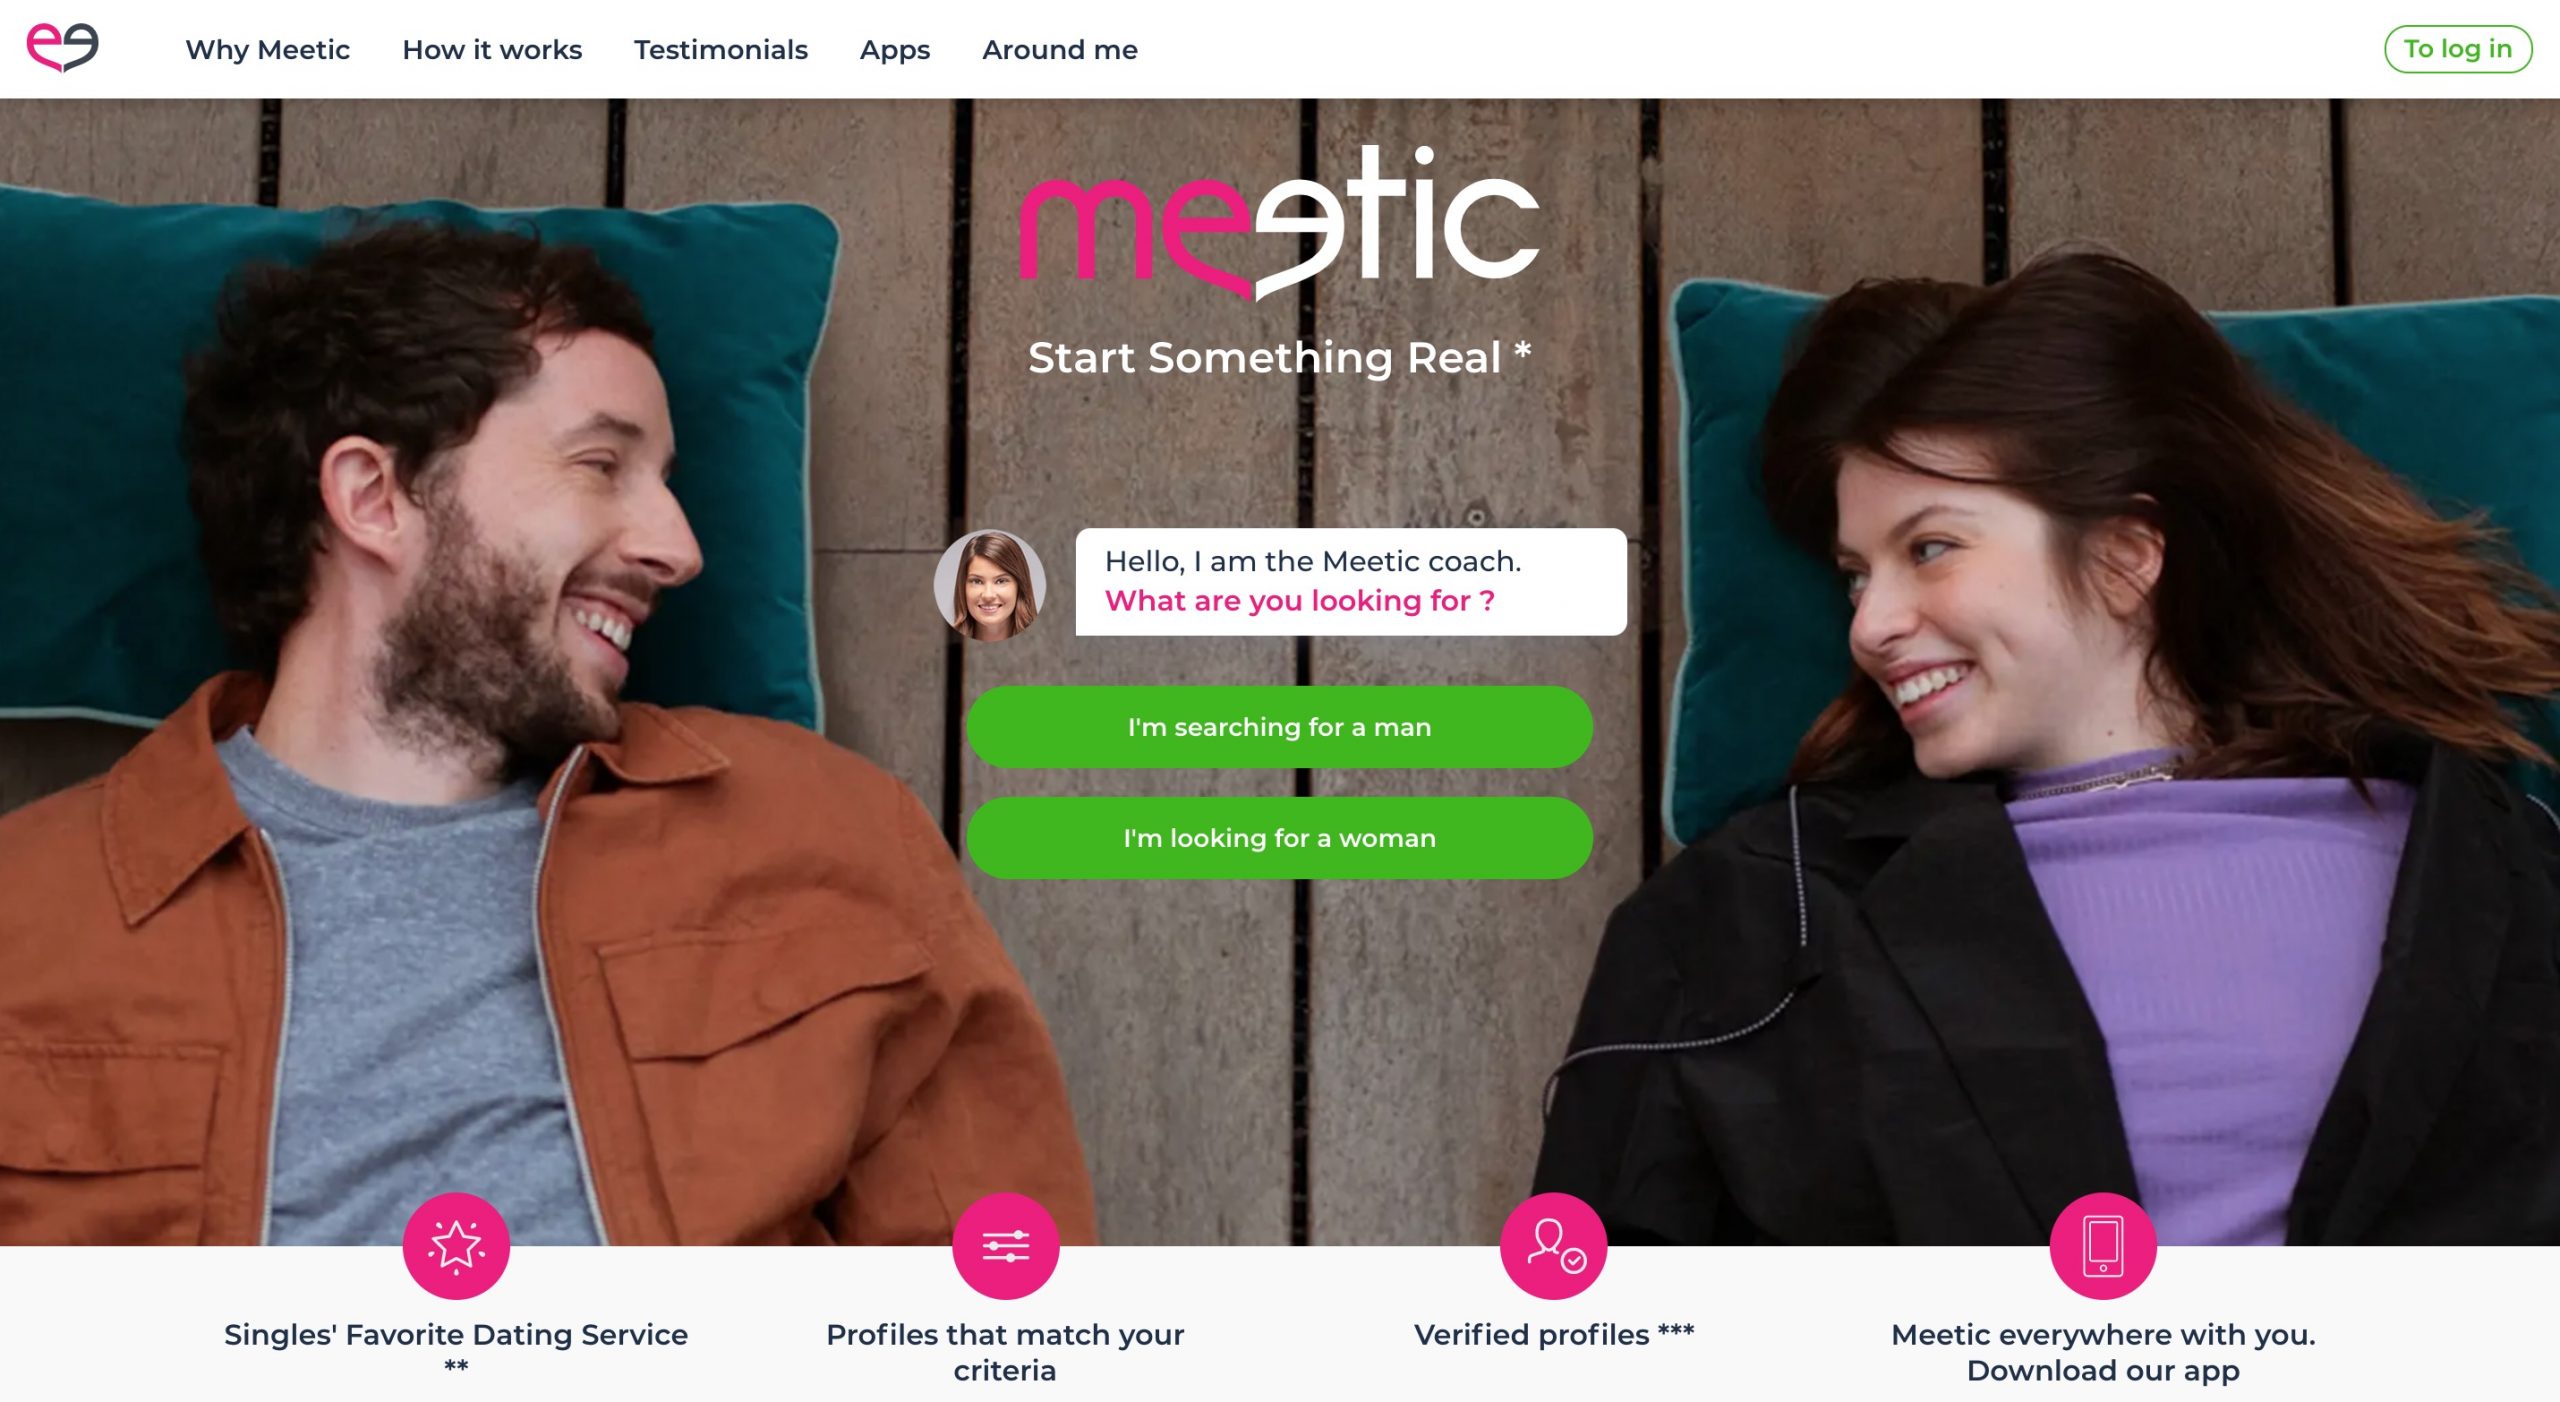 Meetic main page